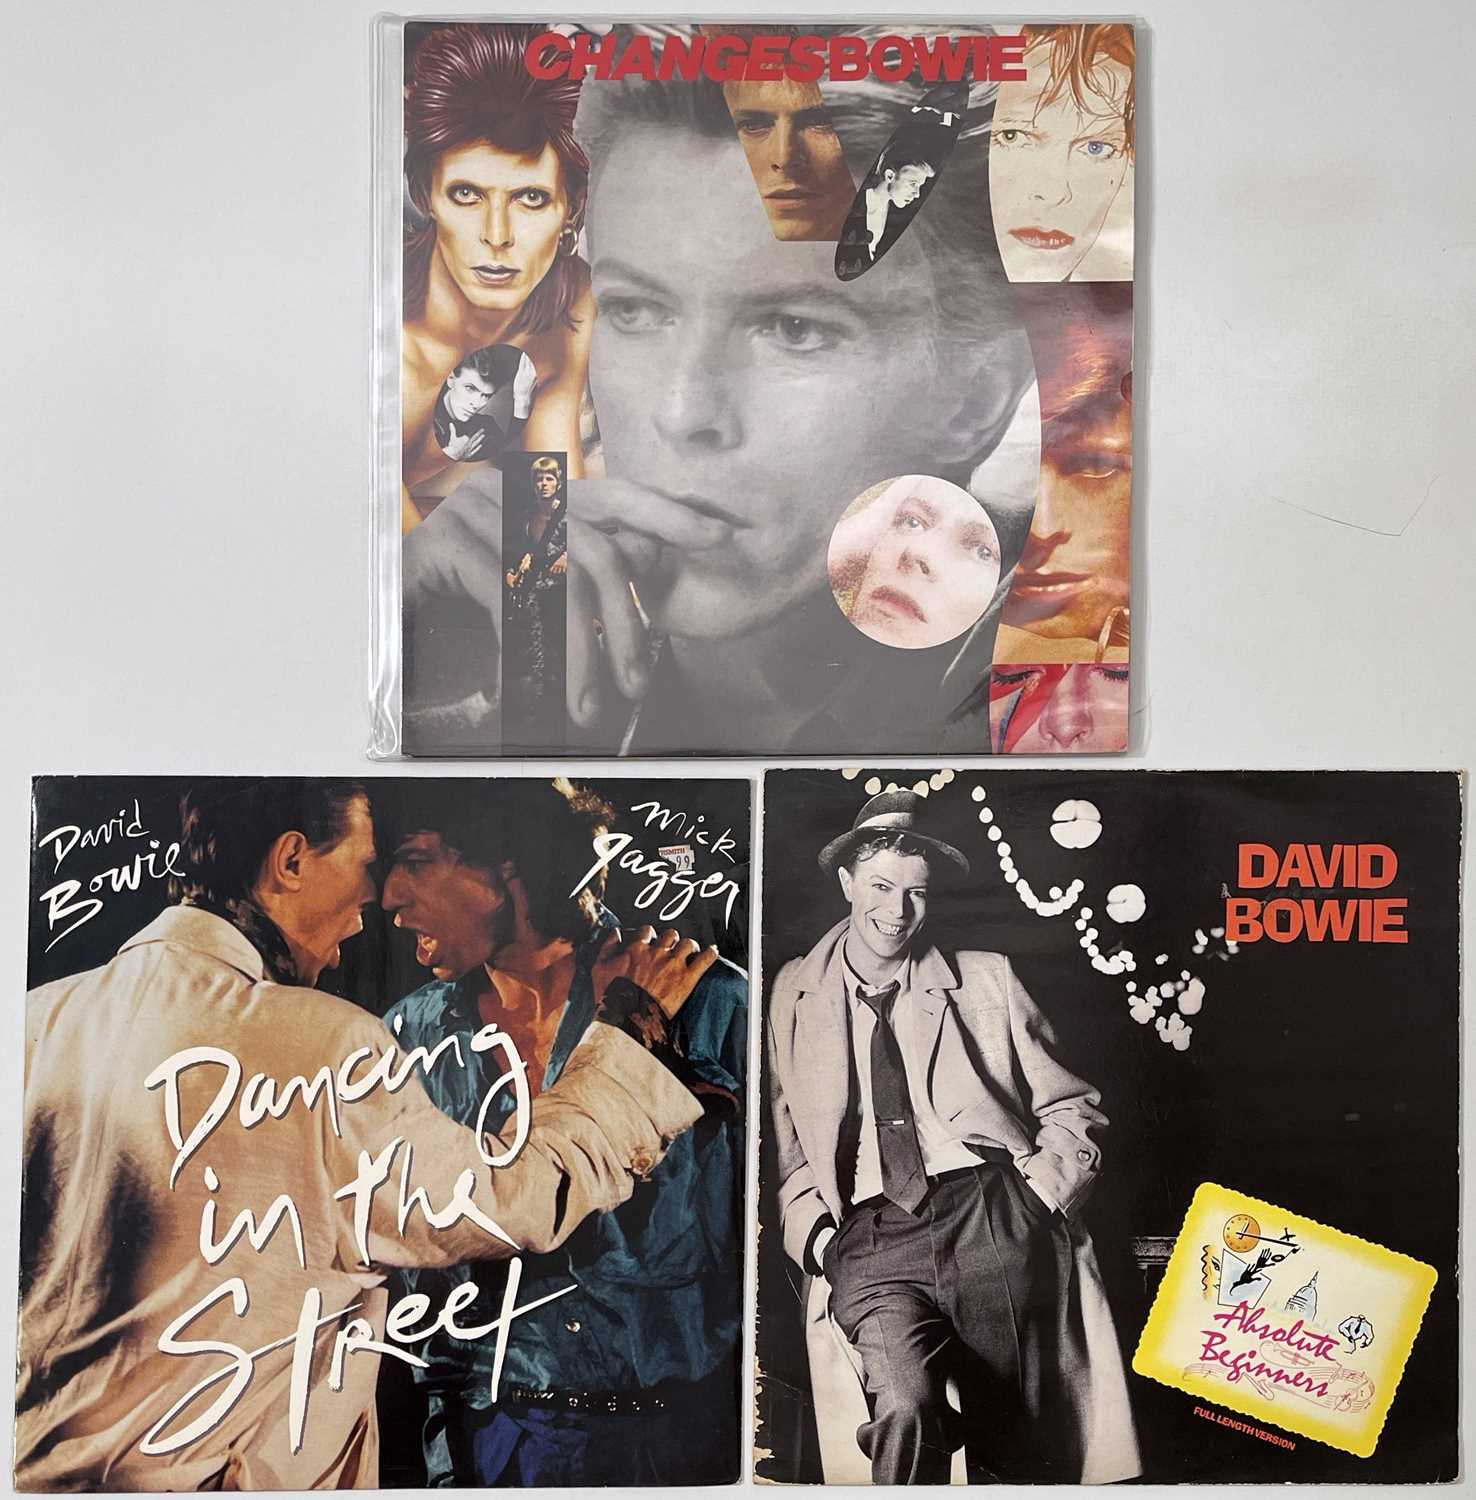 DAVID BOWIE - LP / 12" COLLECTION - Image 6 of 6